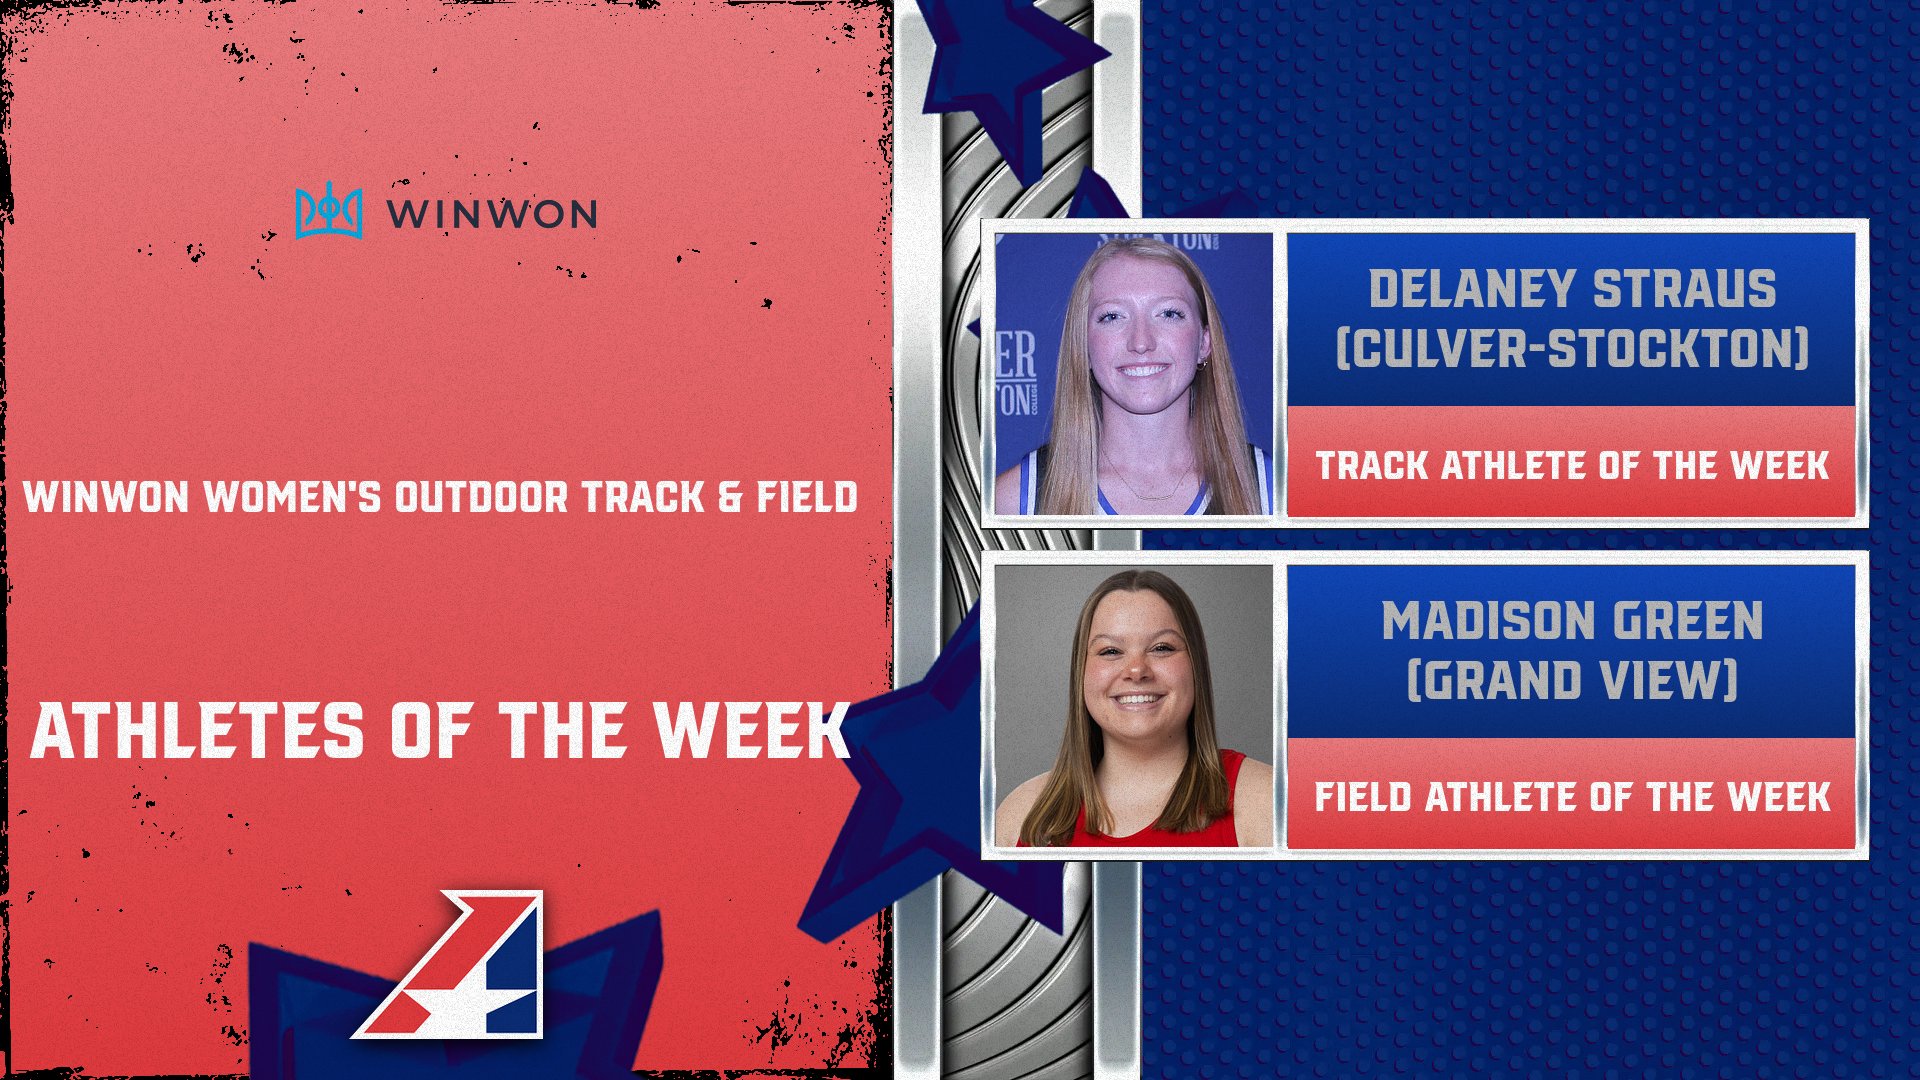 Delaney Straus, Madison Green Selected WinWon Women’s Outdoor Track & Field Athletes of the Week